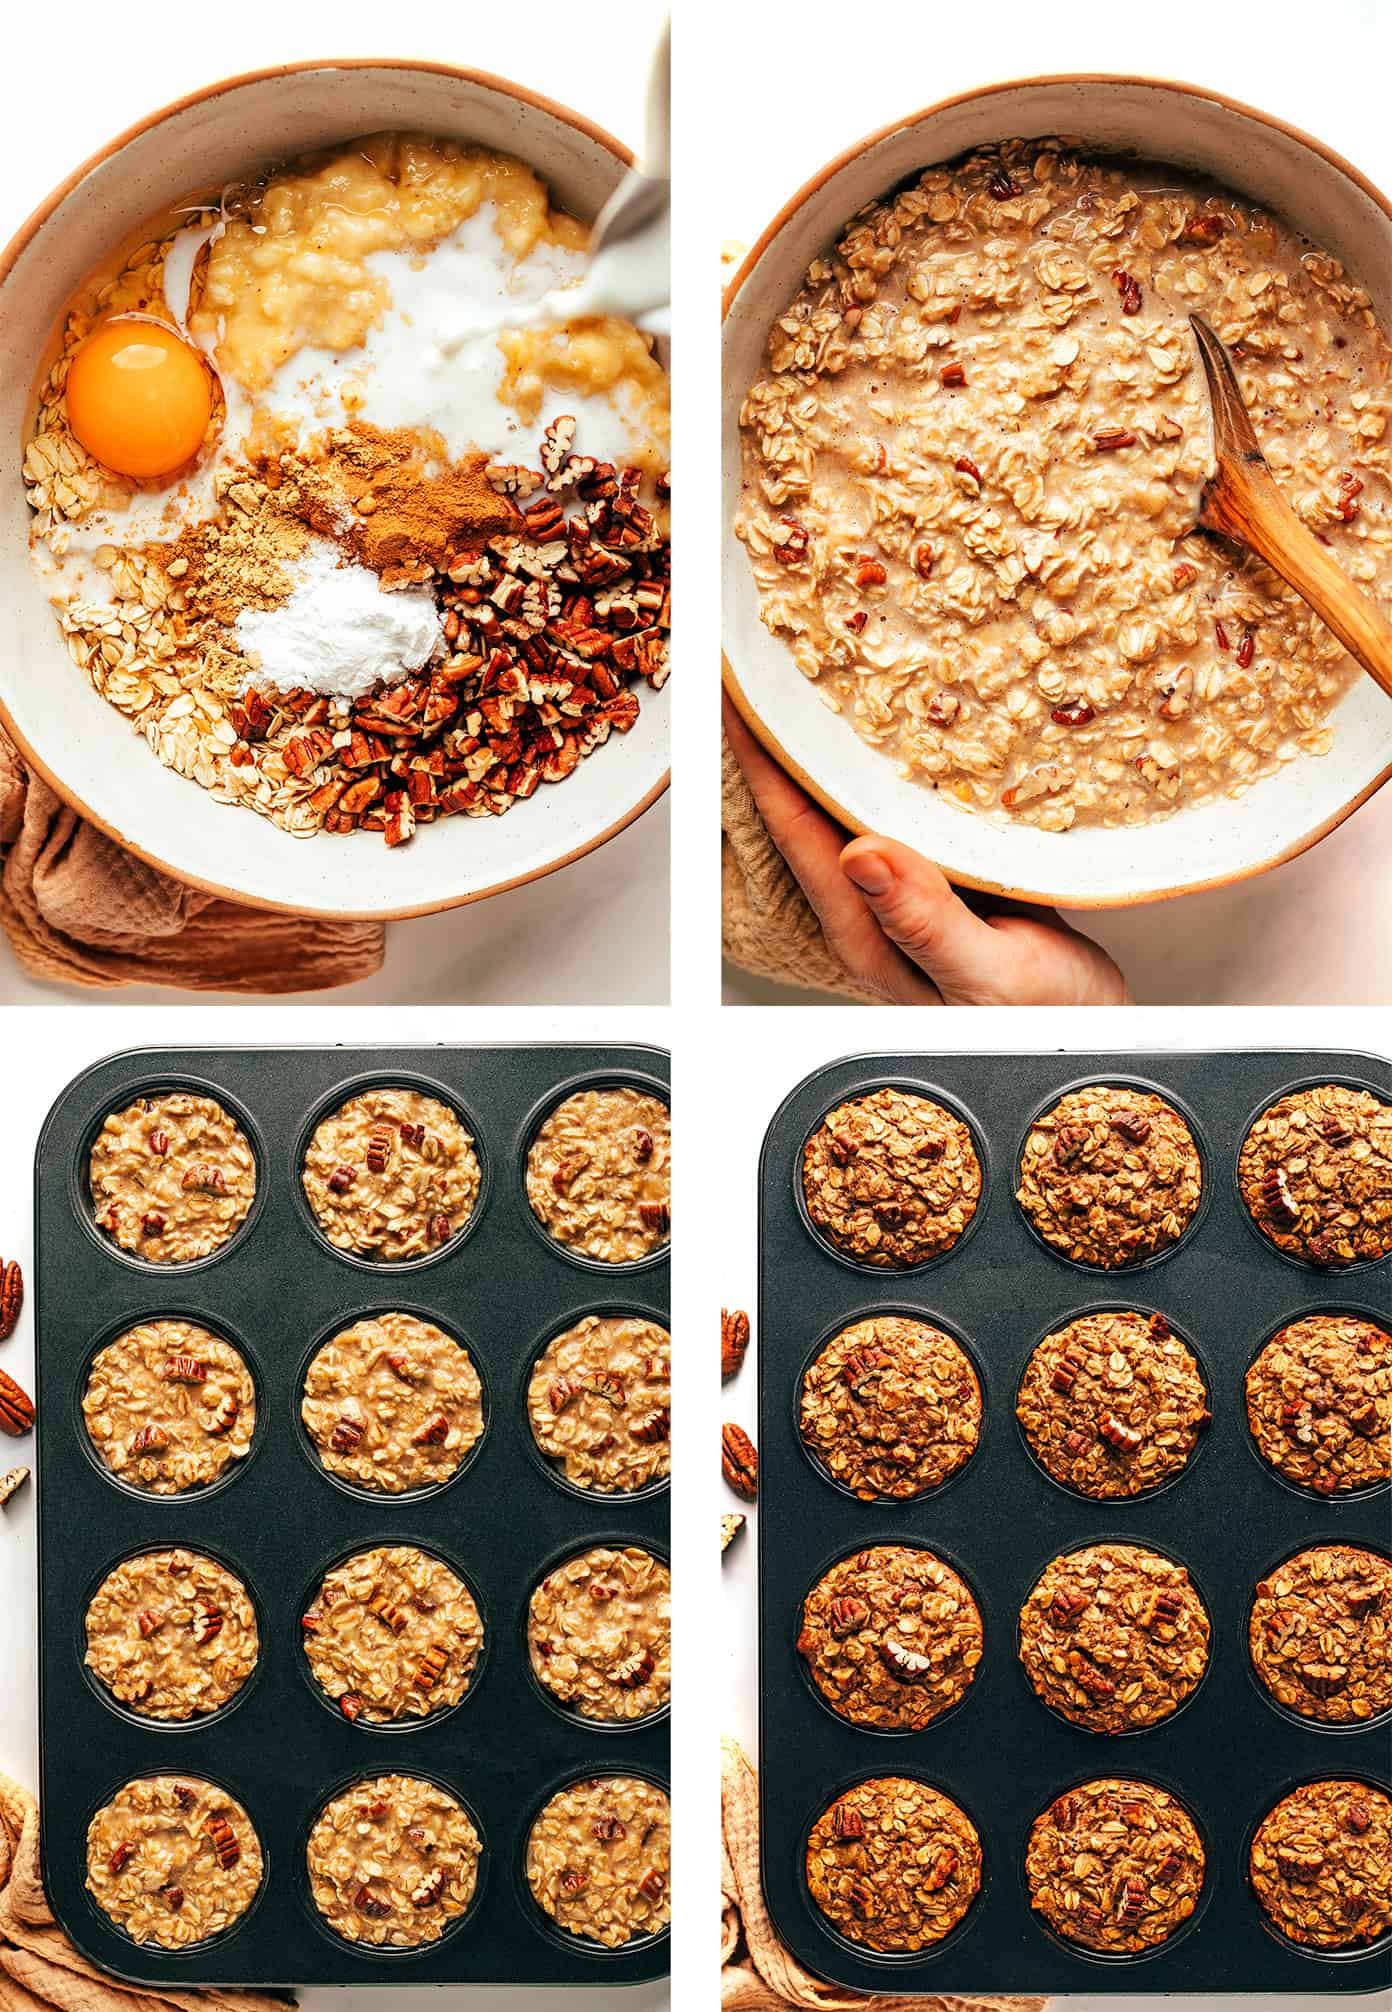 Step by step photos showing how to make baked oatmeal cups